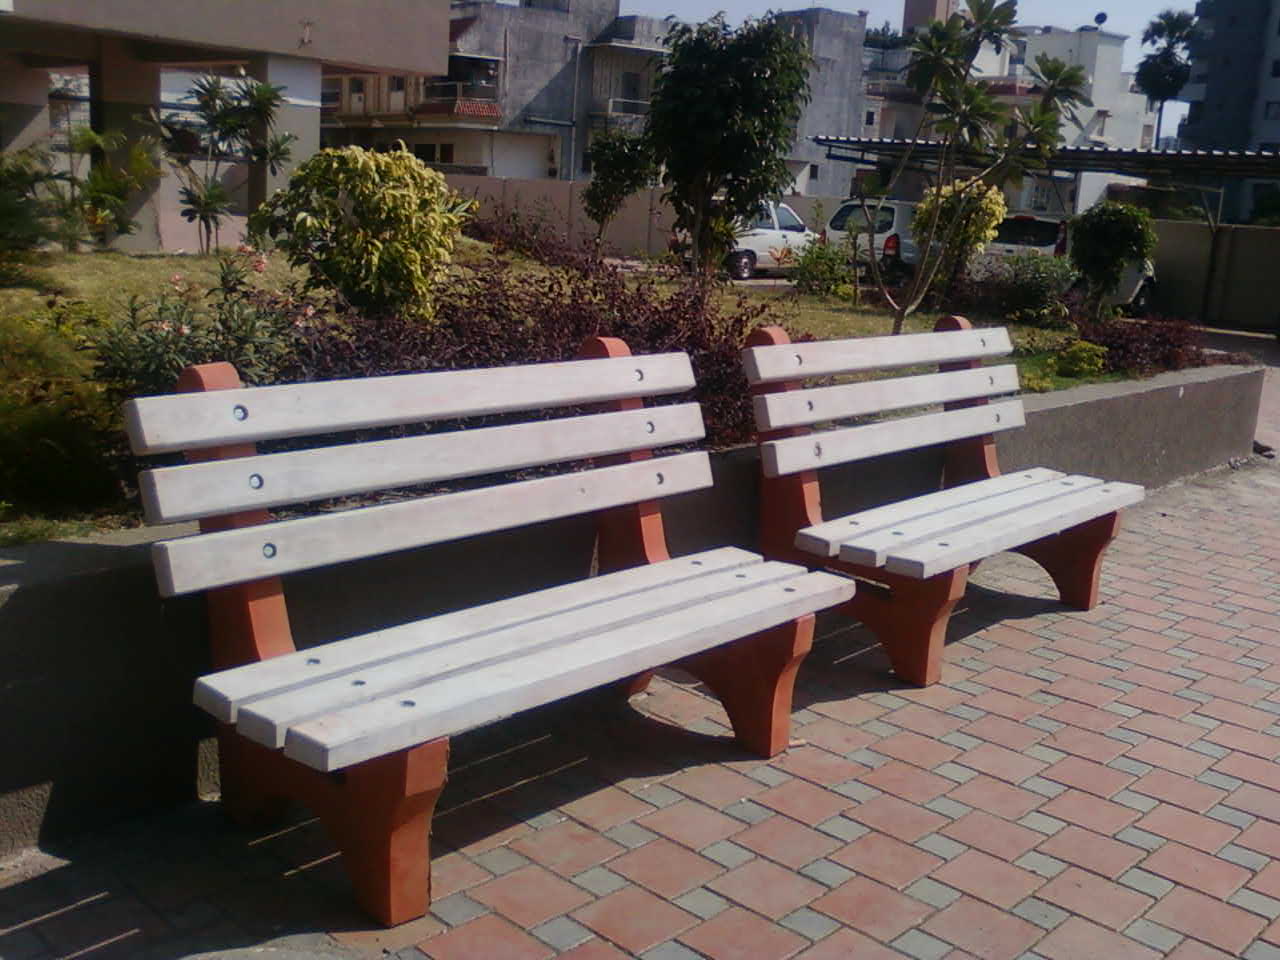 Rcc Bench With Back Rest (wooden Texture)